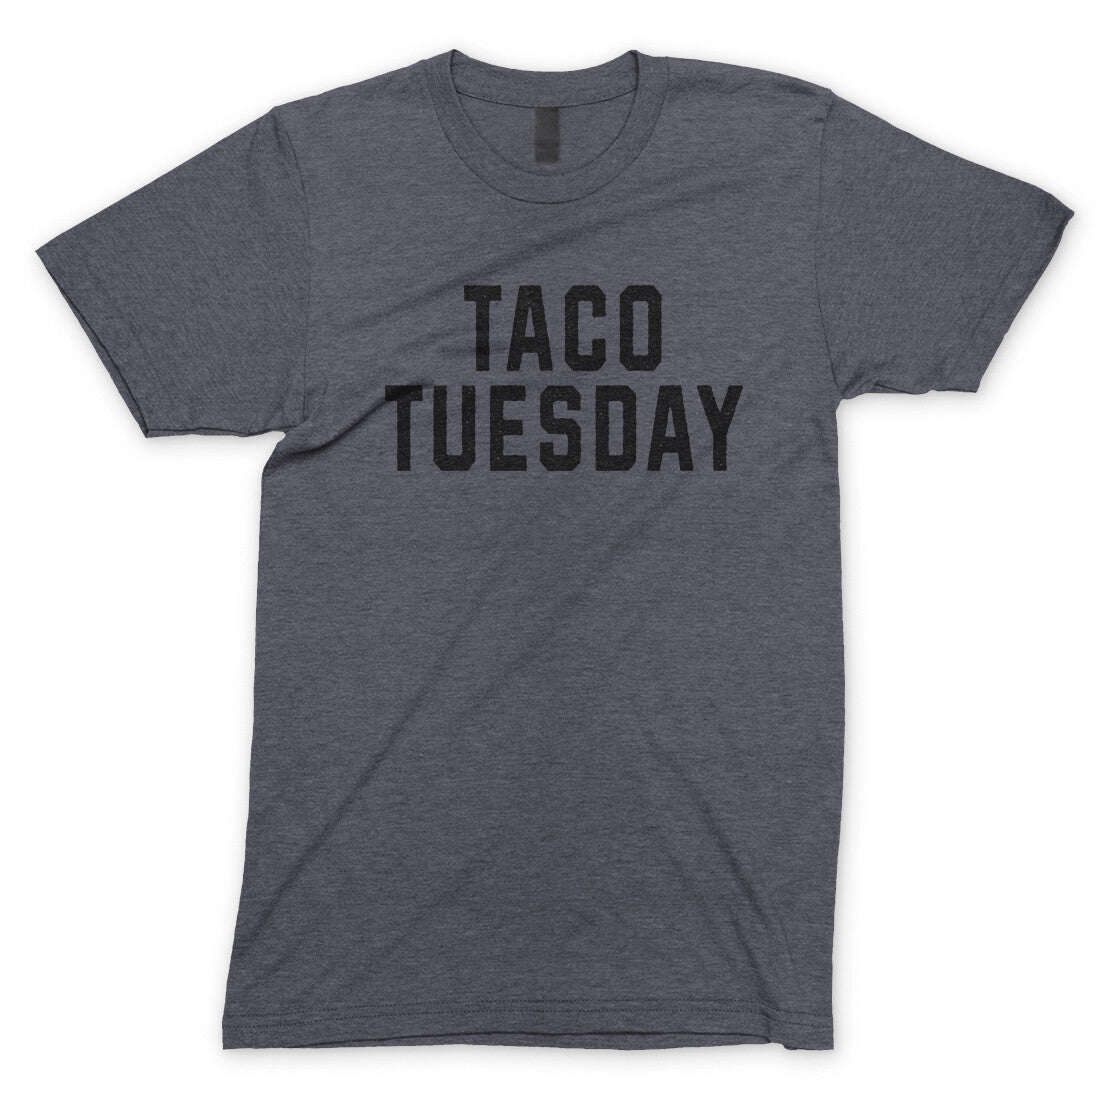 Taco Tuesday in Dark Heather Color